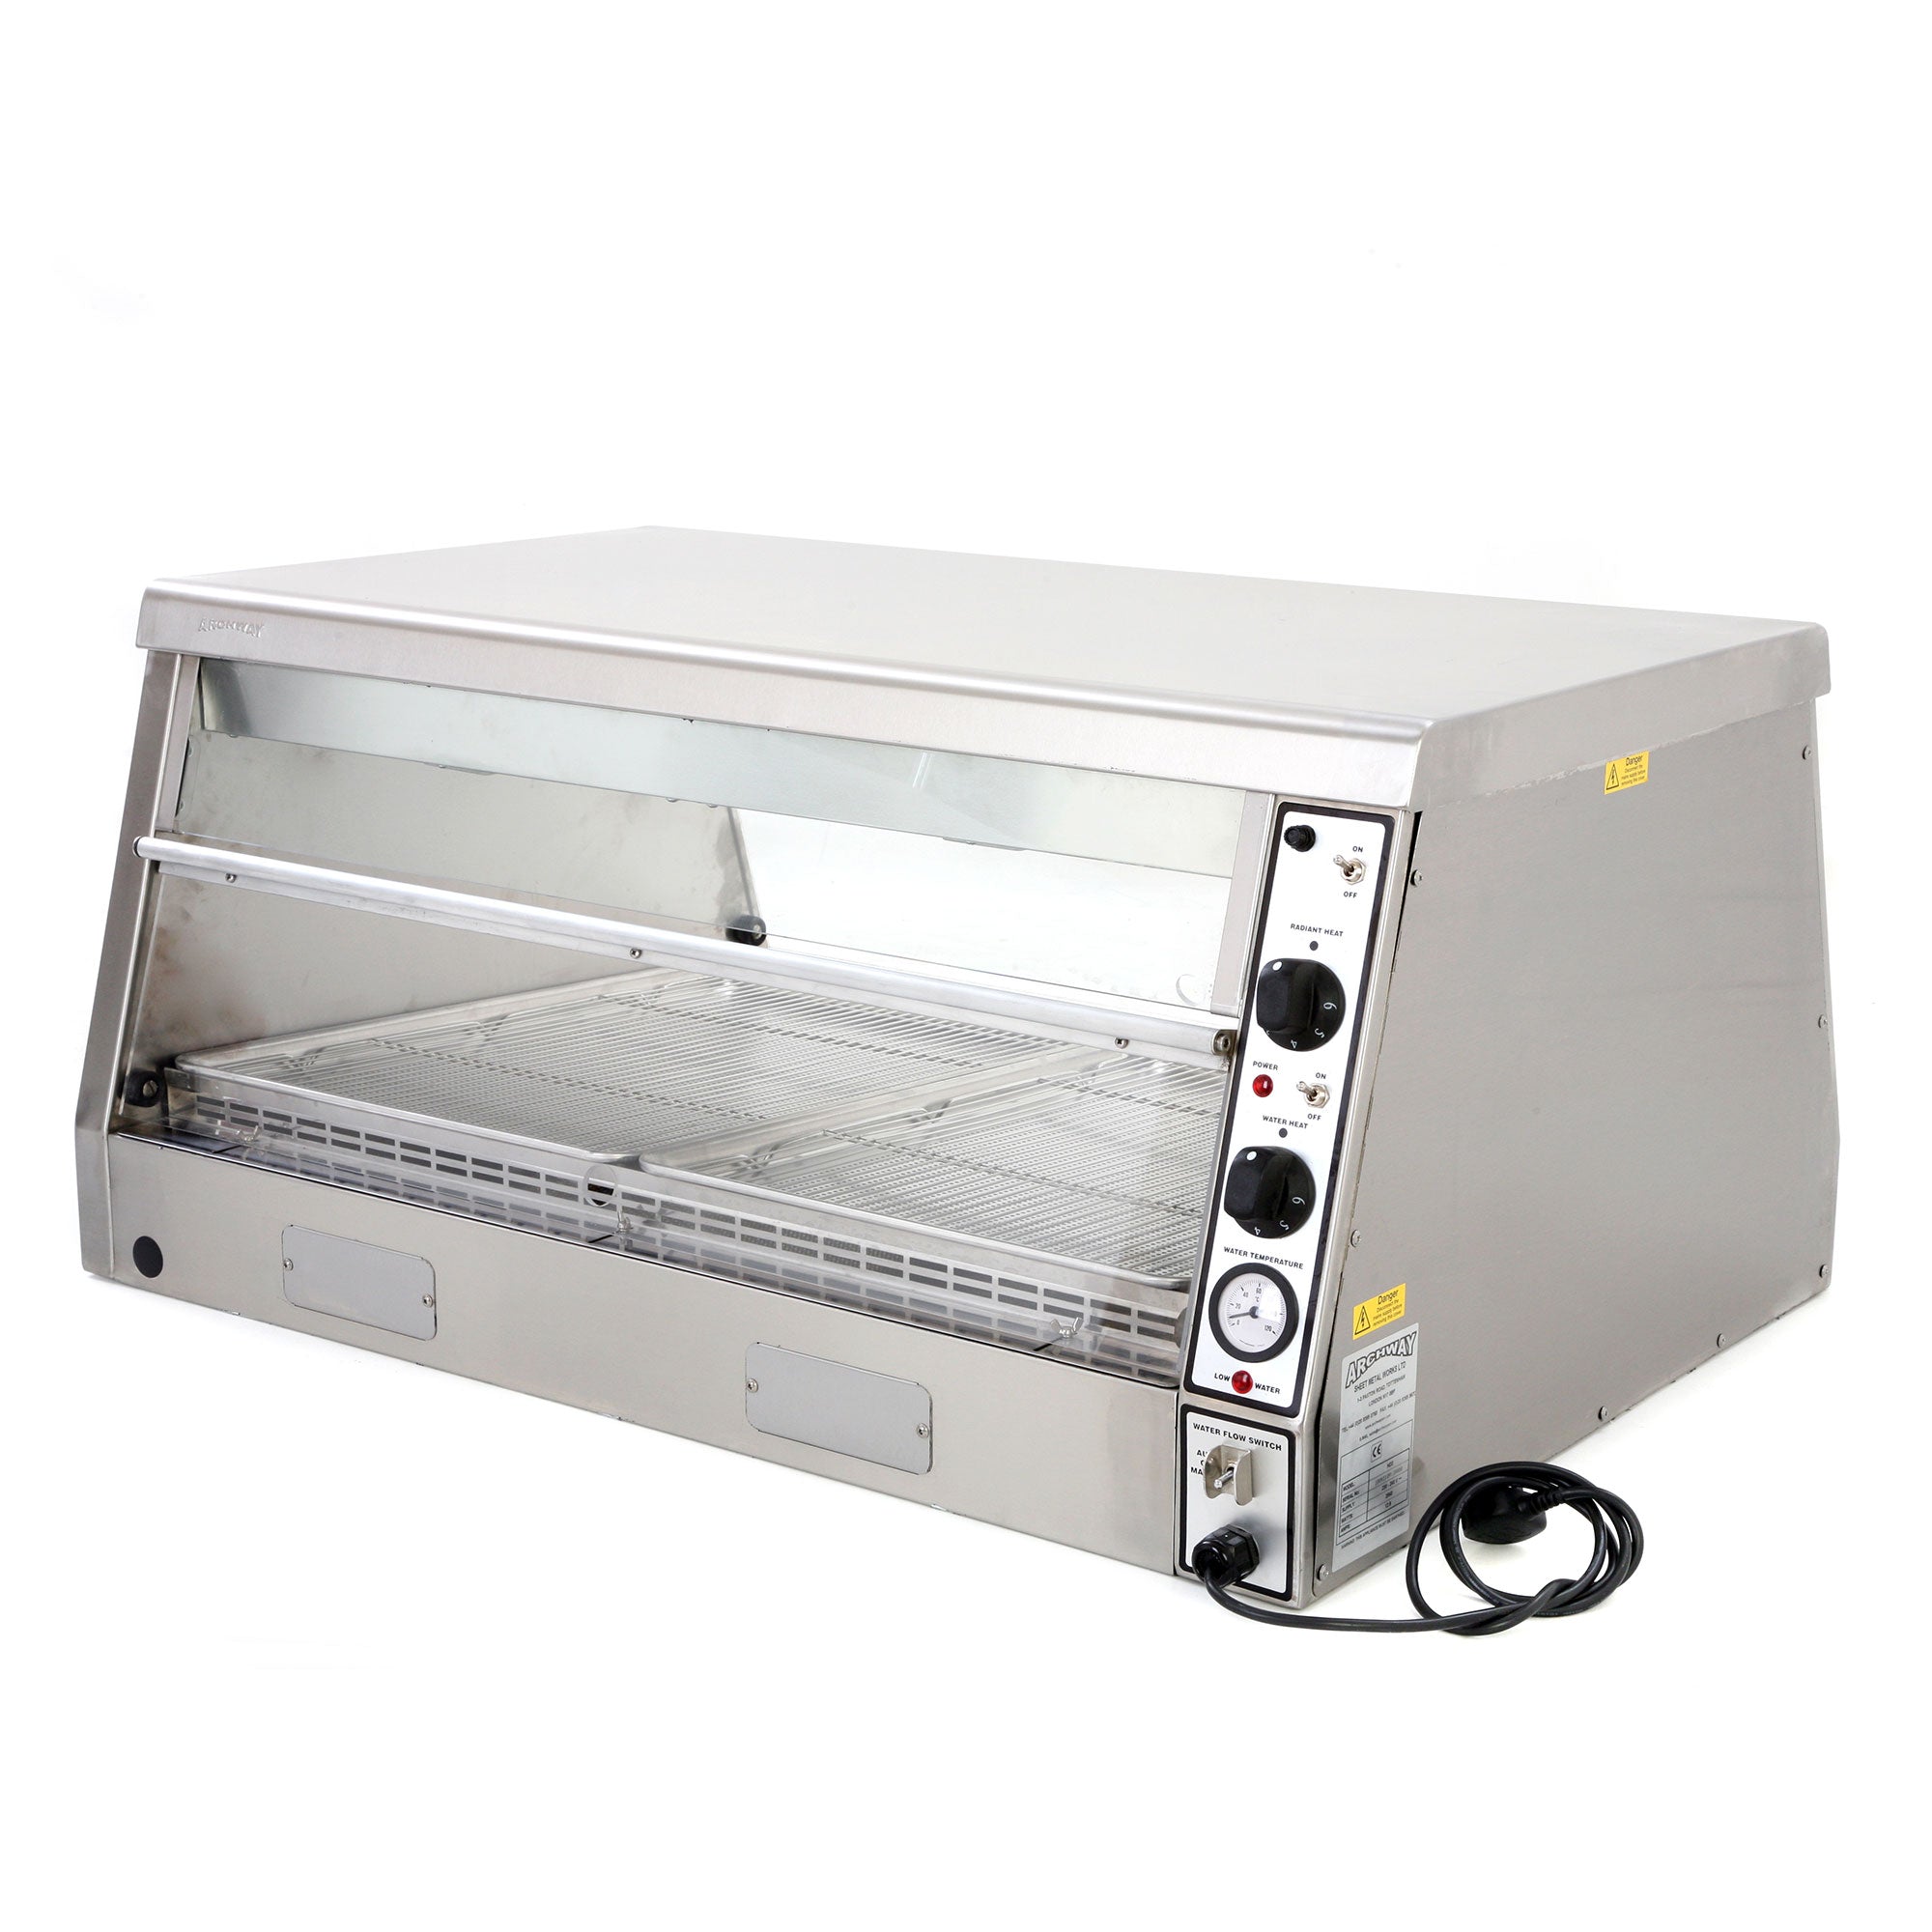 ARCHWAY Heated Chicken Display – 2 Pans.Product ref:00449.MODEL:HD2.🚚 4-6 Weeks Delivery